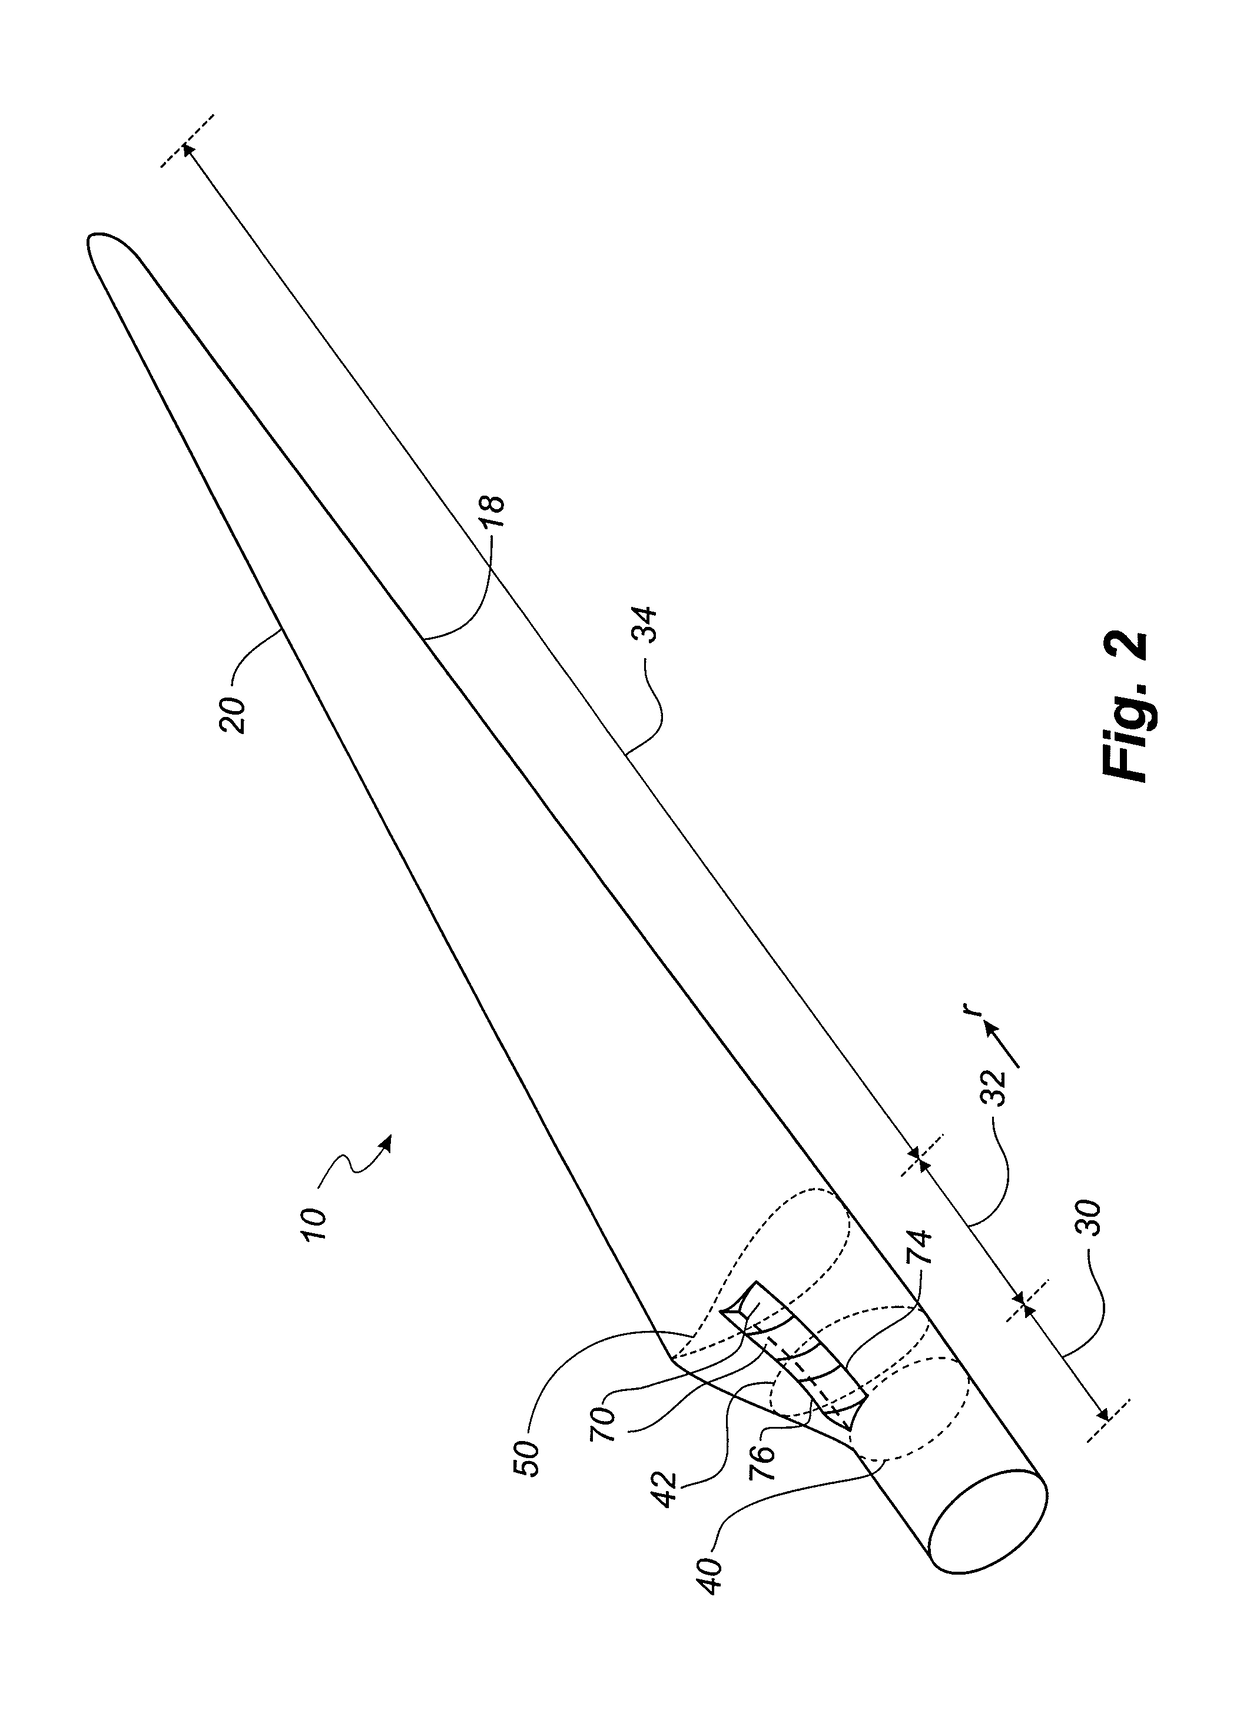 Wind turbine blade with plurality of longitudinally extending flow guiding device parts